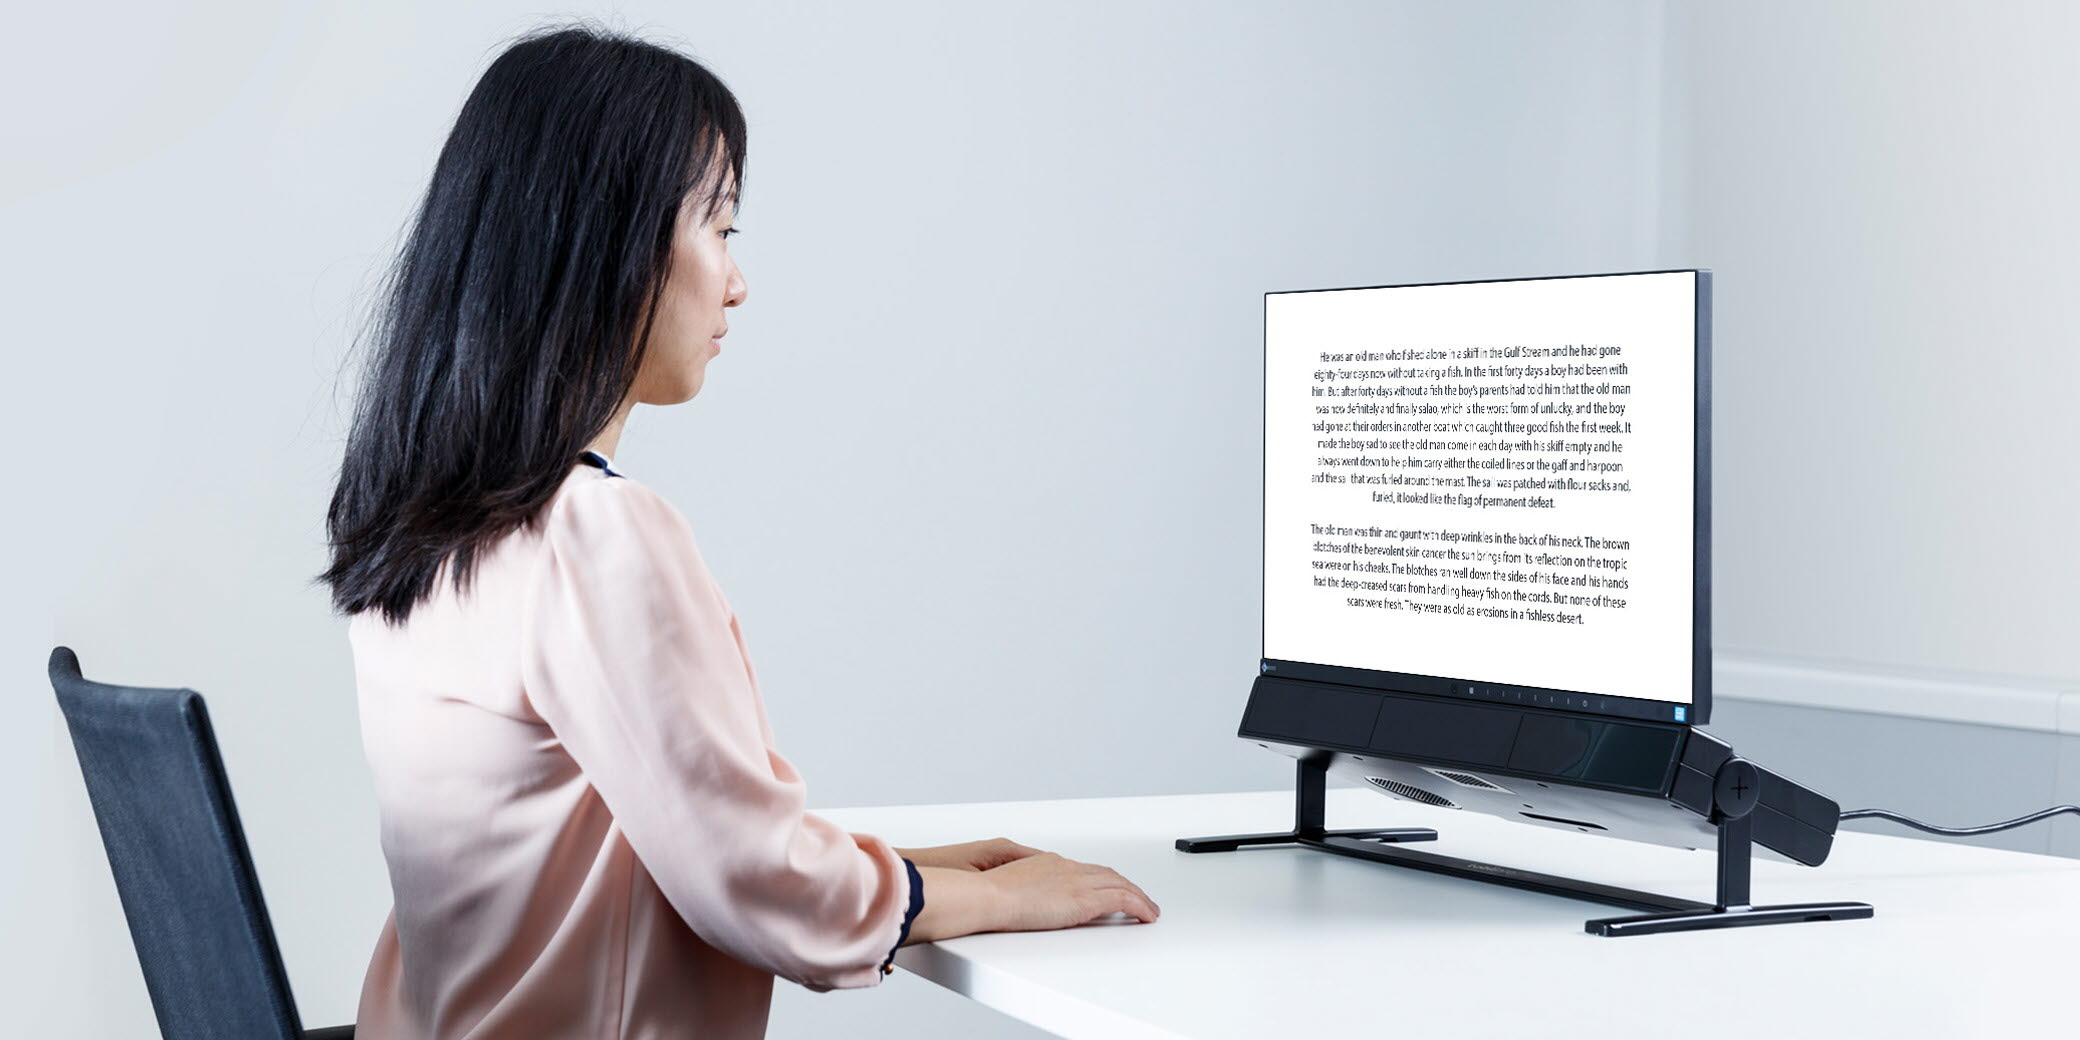 Tobii Pro Spectrum used for reading research